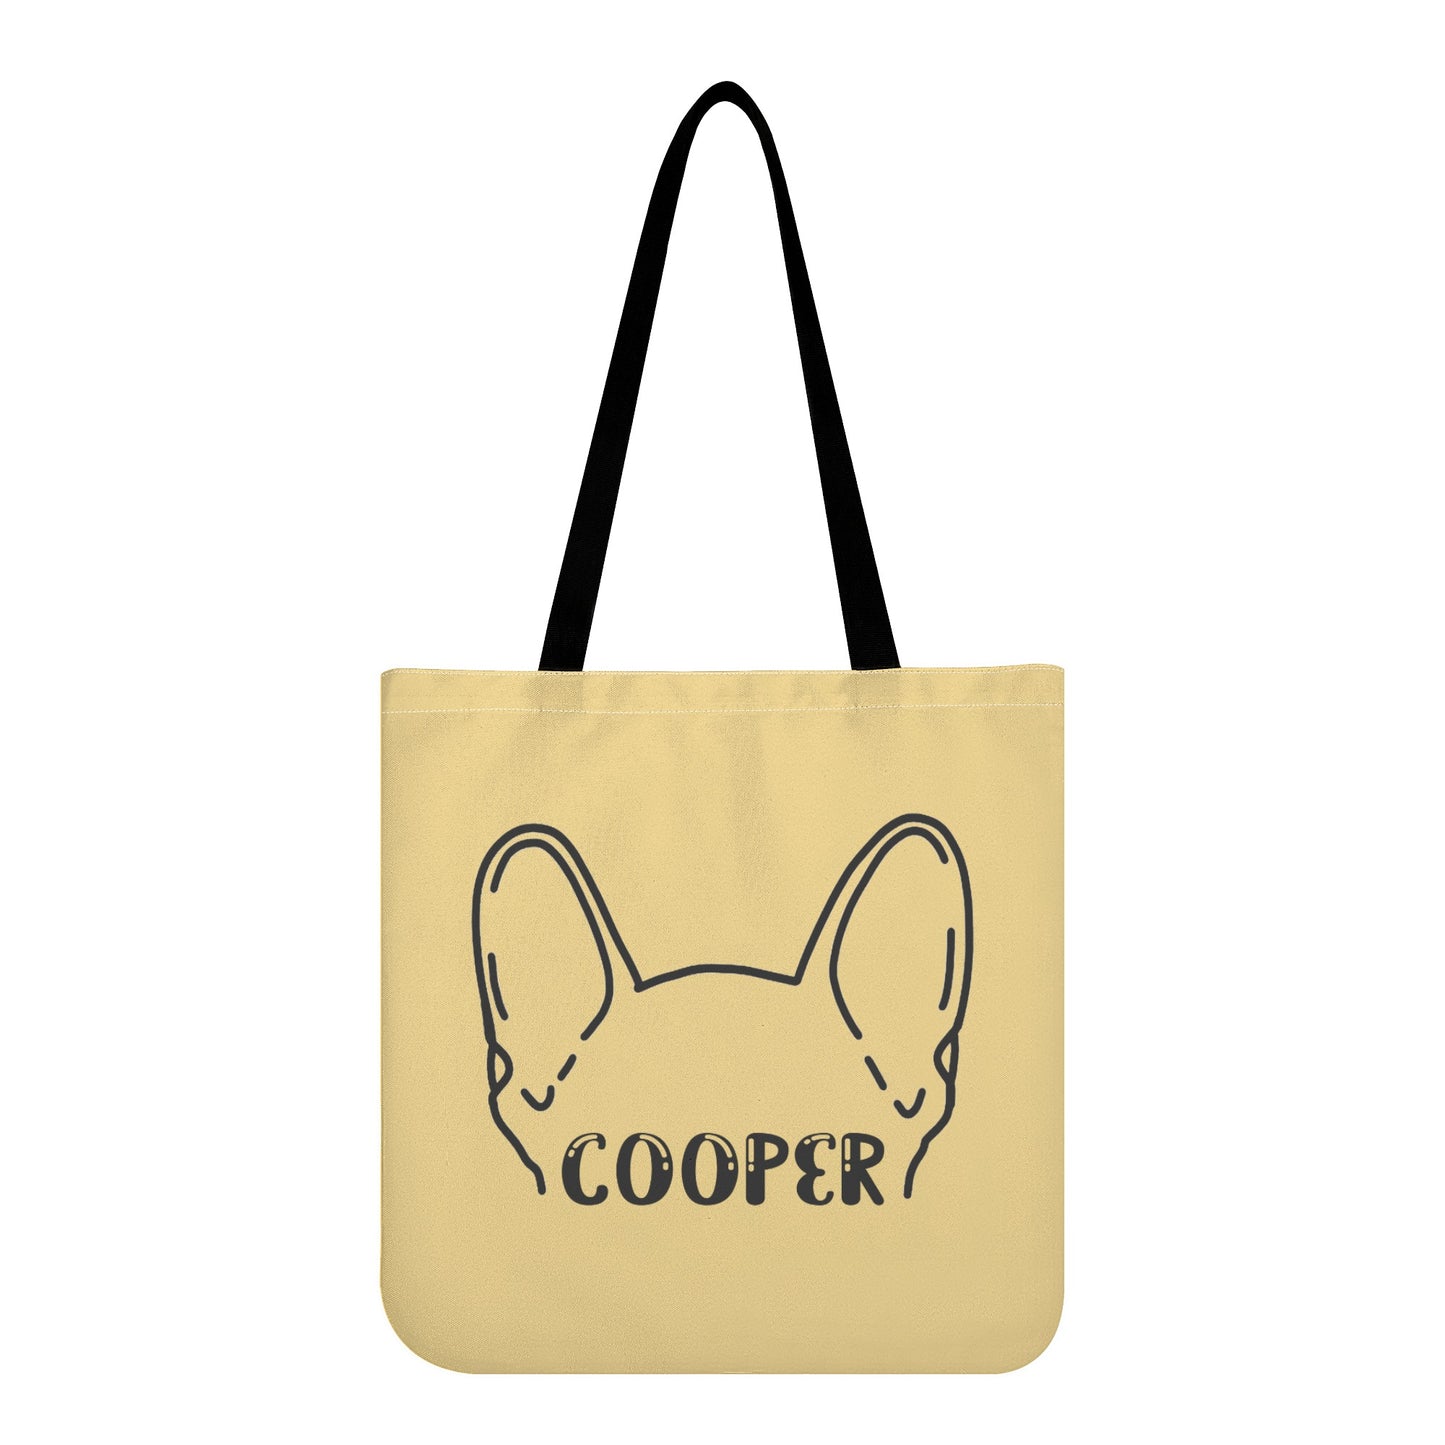 Cutome Tote Bag with Frenchie Name